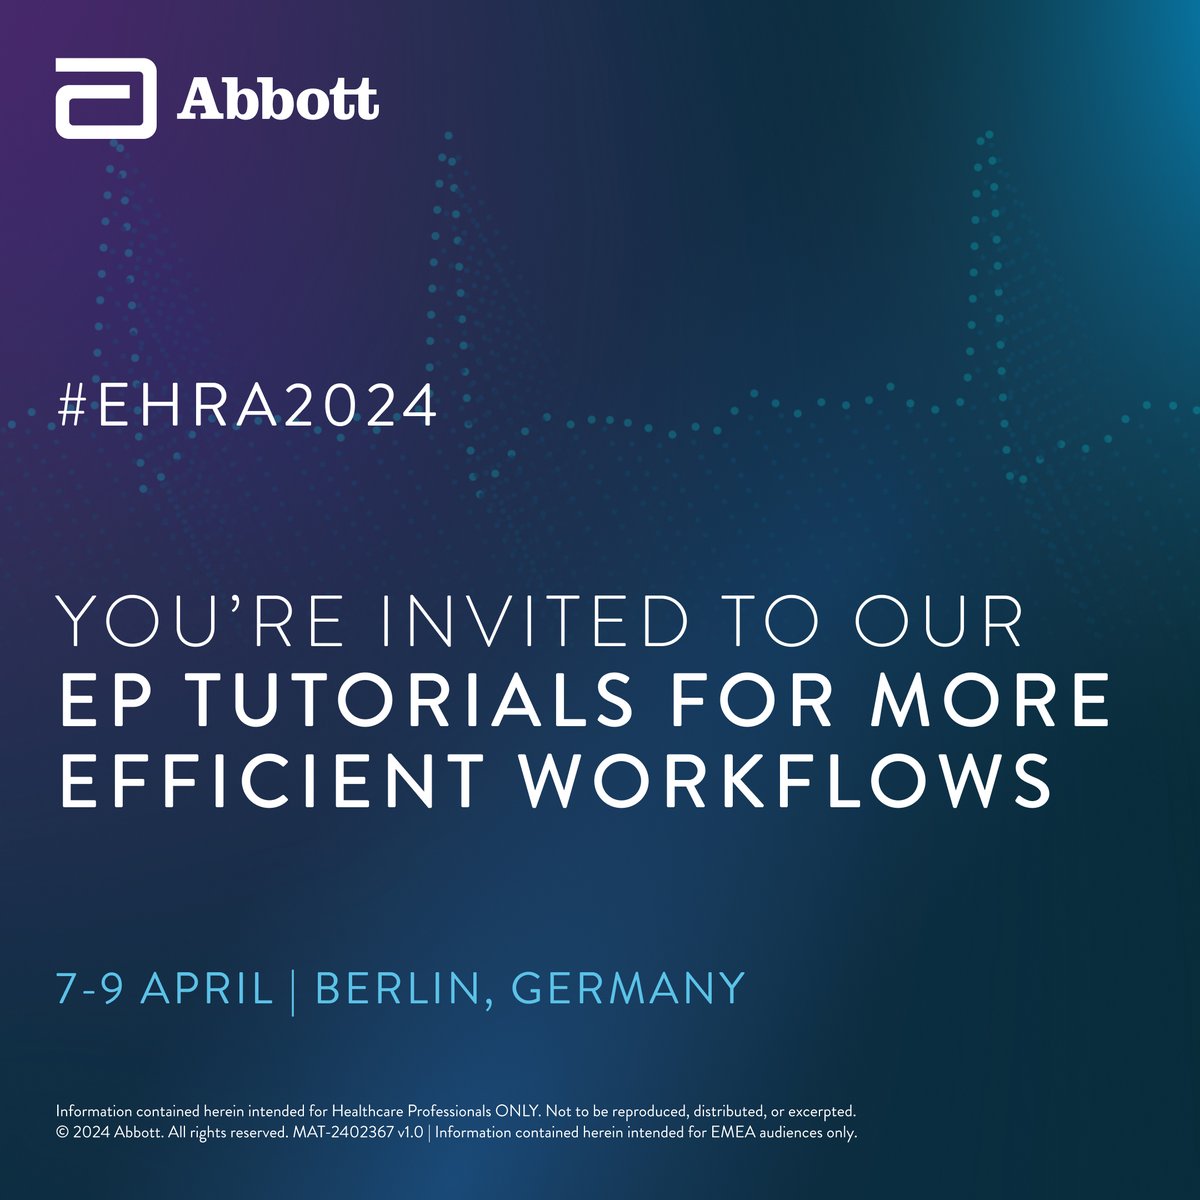 #EHRA2024 is underway! I’m heading to our practical EP tutorials to hear our expert faculty share how they’re harnessing our #MedTech advancements to optimize workflows and improve patient outcomes.  

See our sessions: bit.ly/3v7sukb 

#AbbottProud